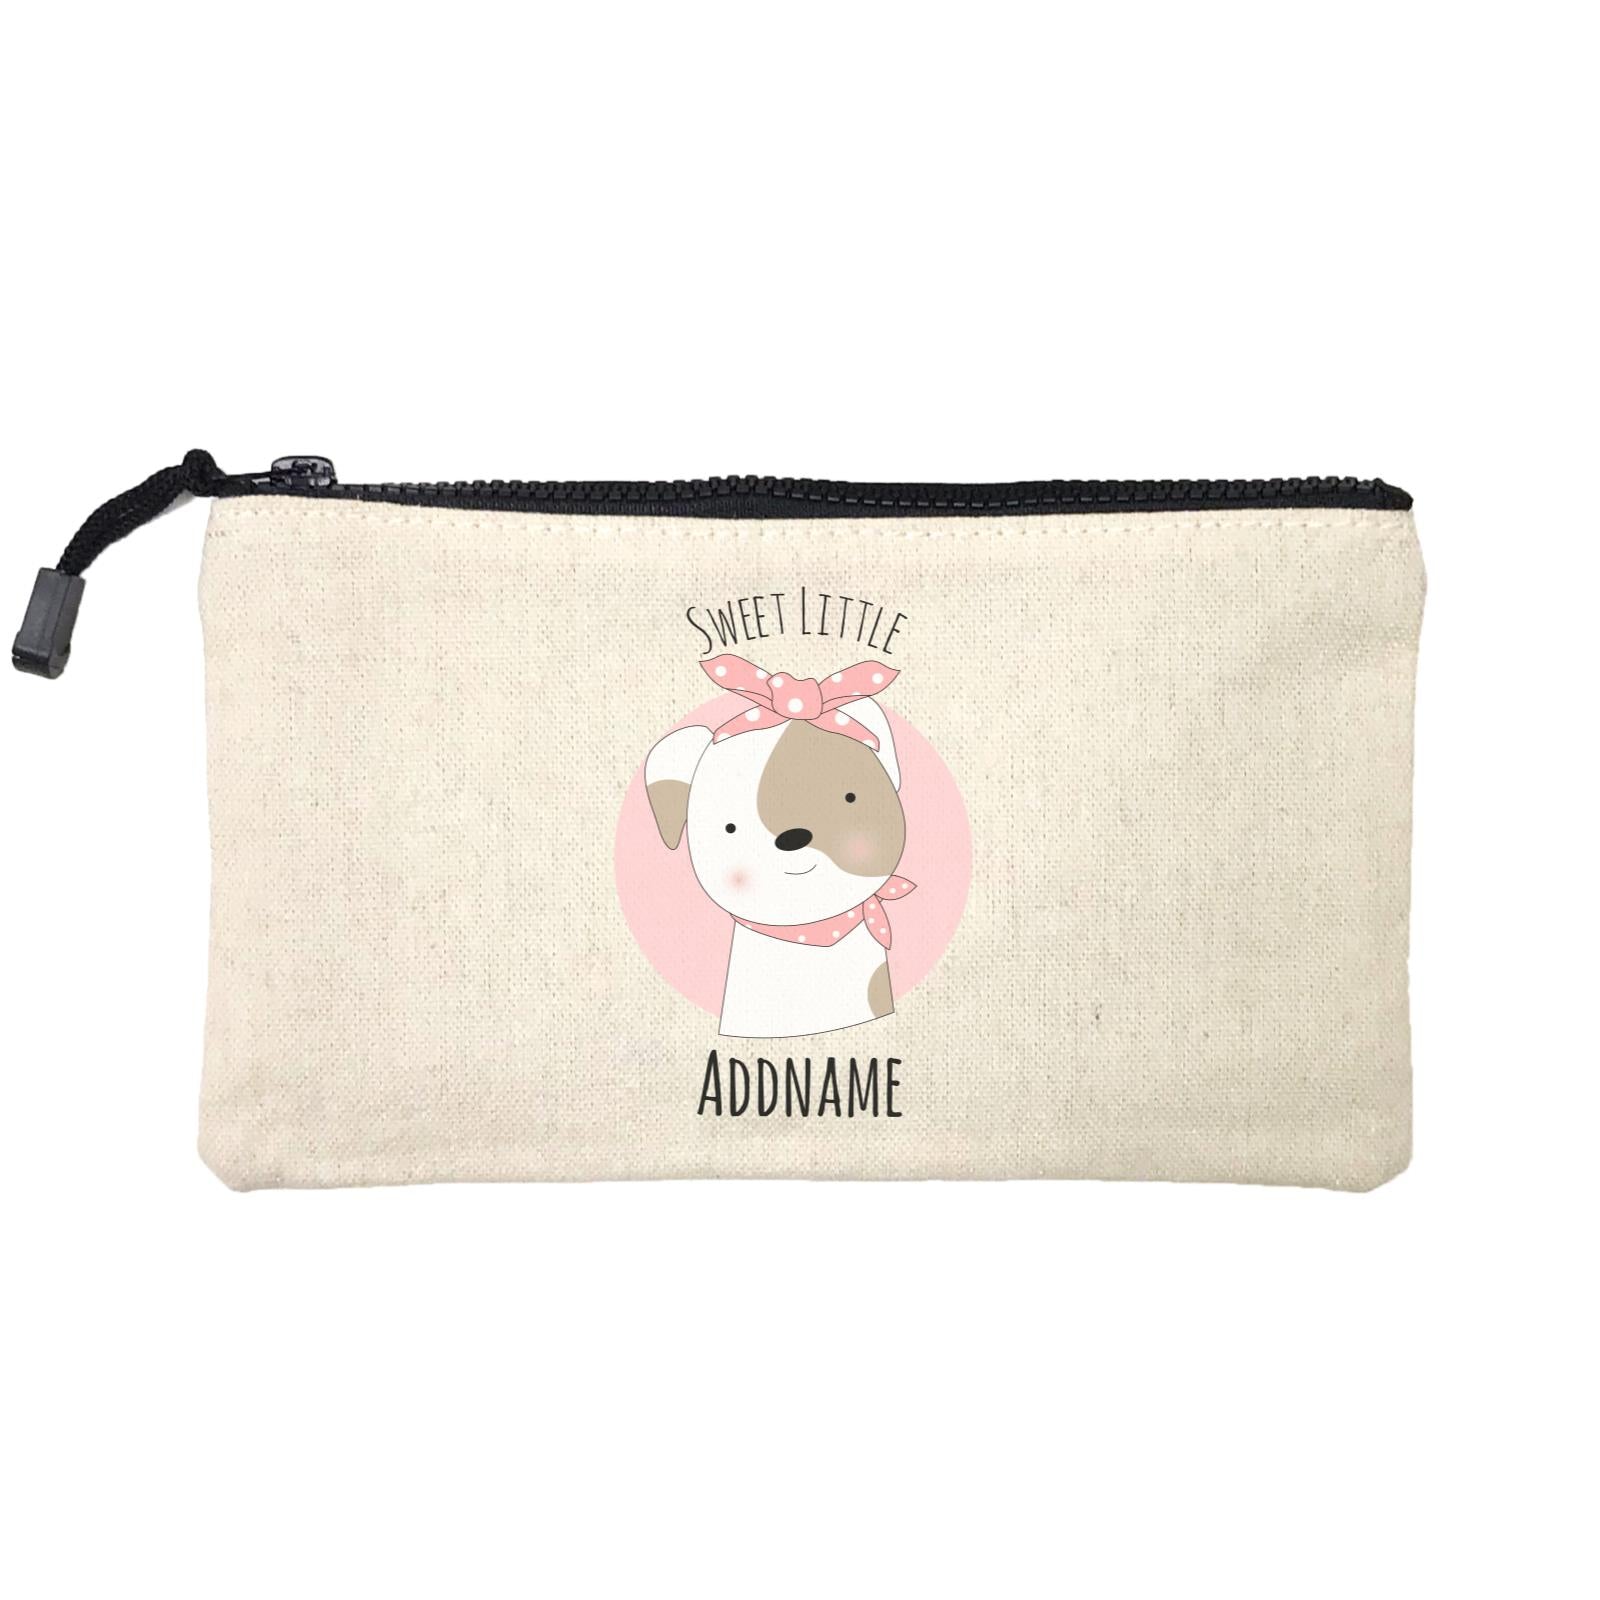 Sweet Animals Sketches Dog Sweet Little Addname Mini Accessories Stationery Pouch